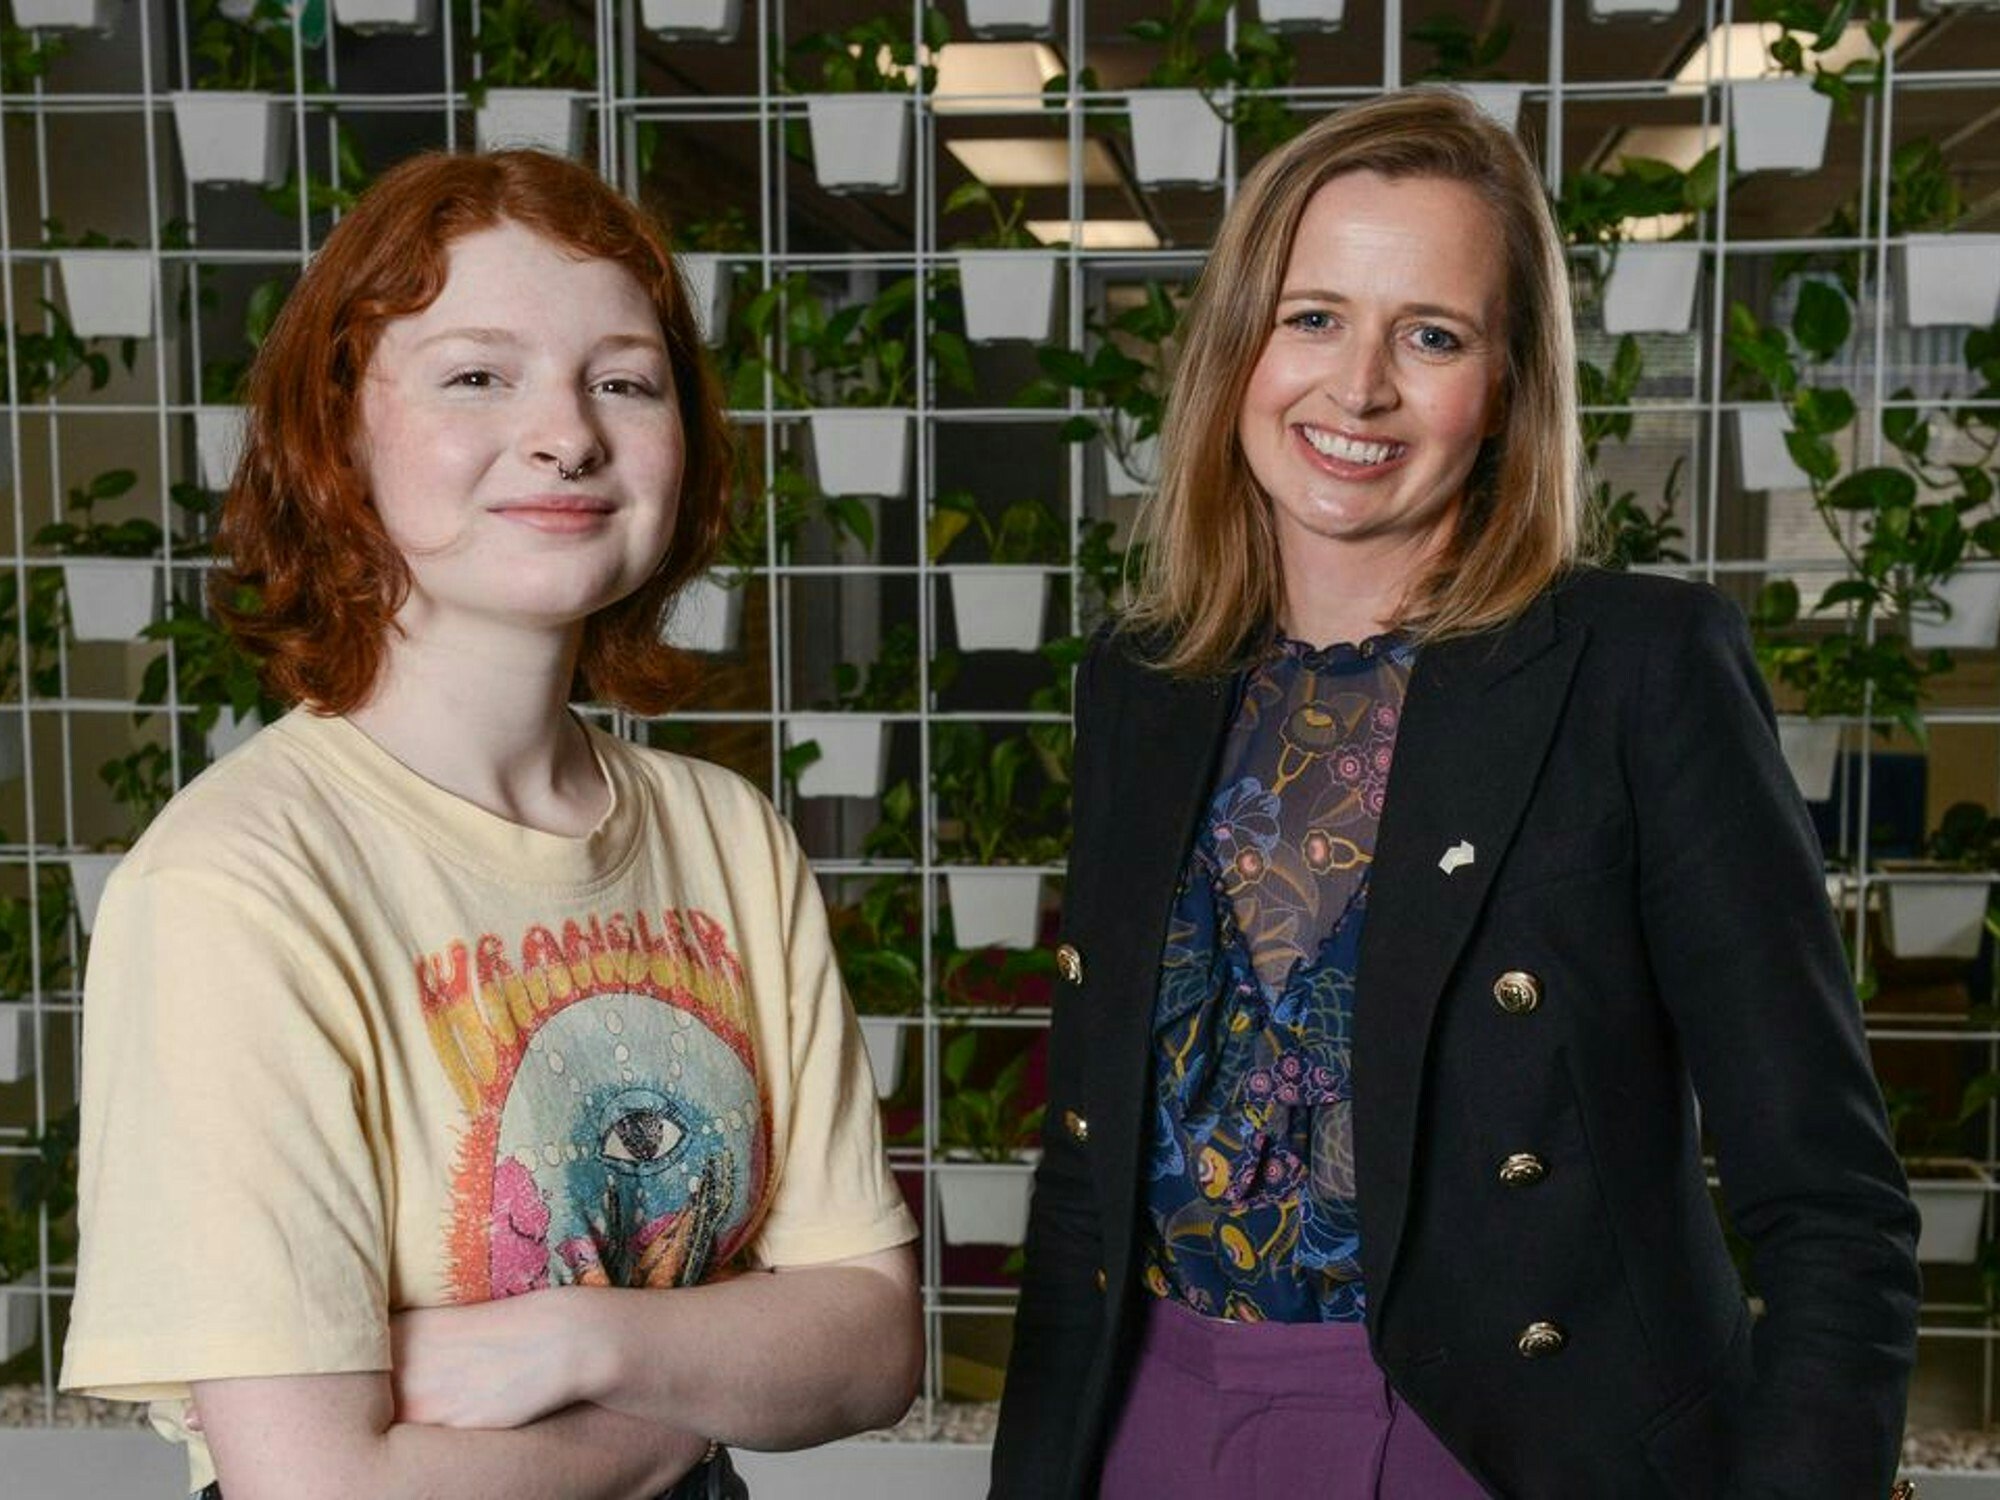 Minister Emily Bourke (right) has a &#8220;complex problem to solve&#8221; according to Autism Awareness Australia. [Source: Twitter]
